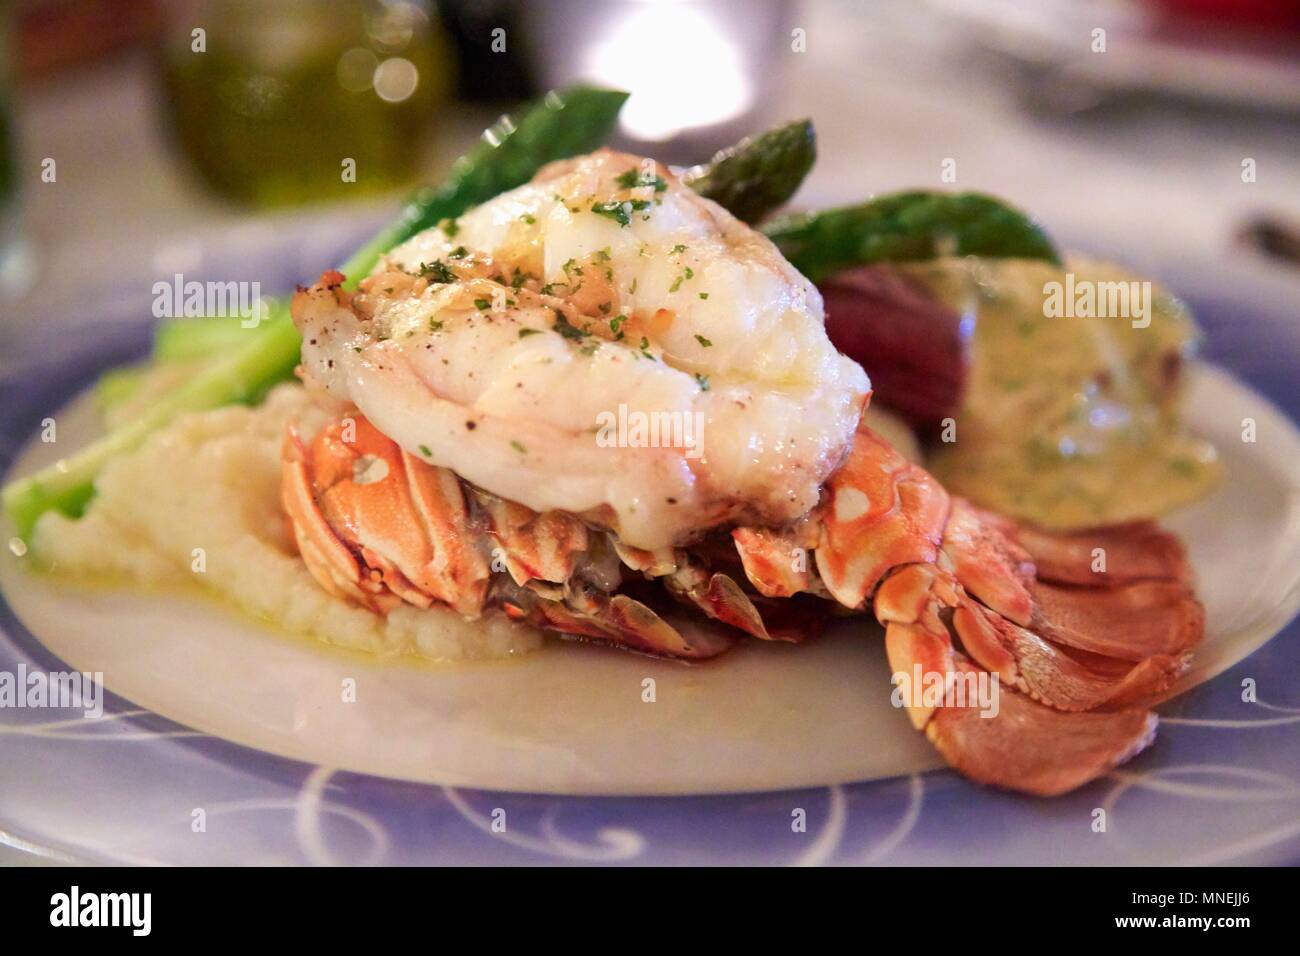 Lobster and steak with asparagus (Costa Rica) Stock Photo